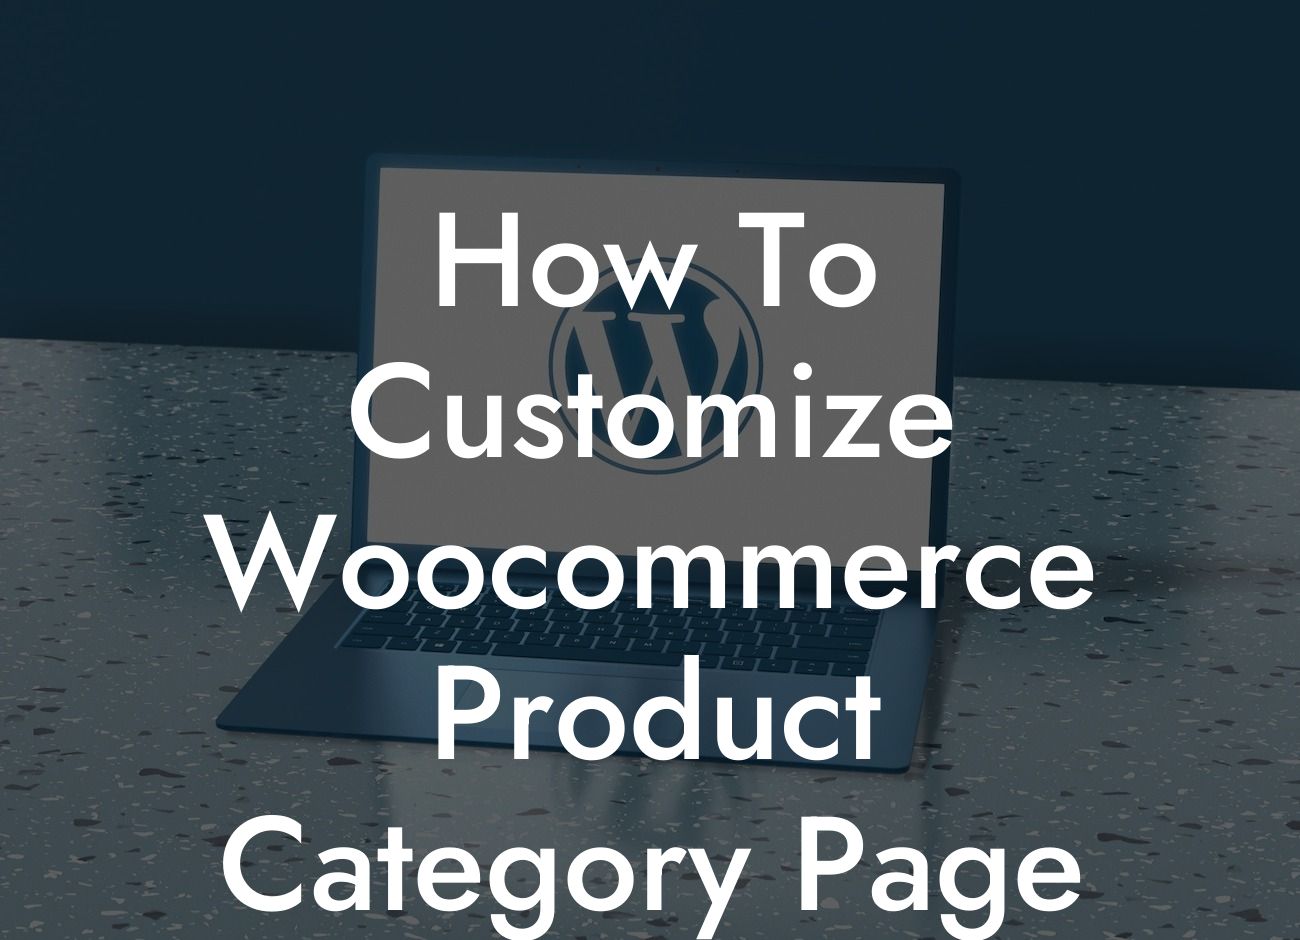 How To Customize Woocommerce Product Category Page